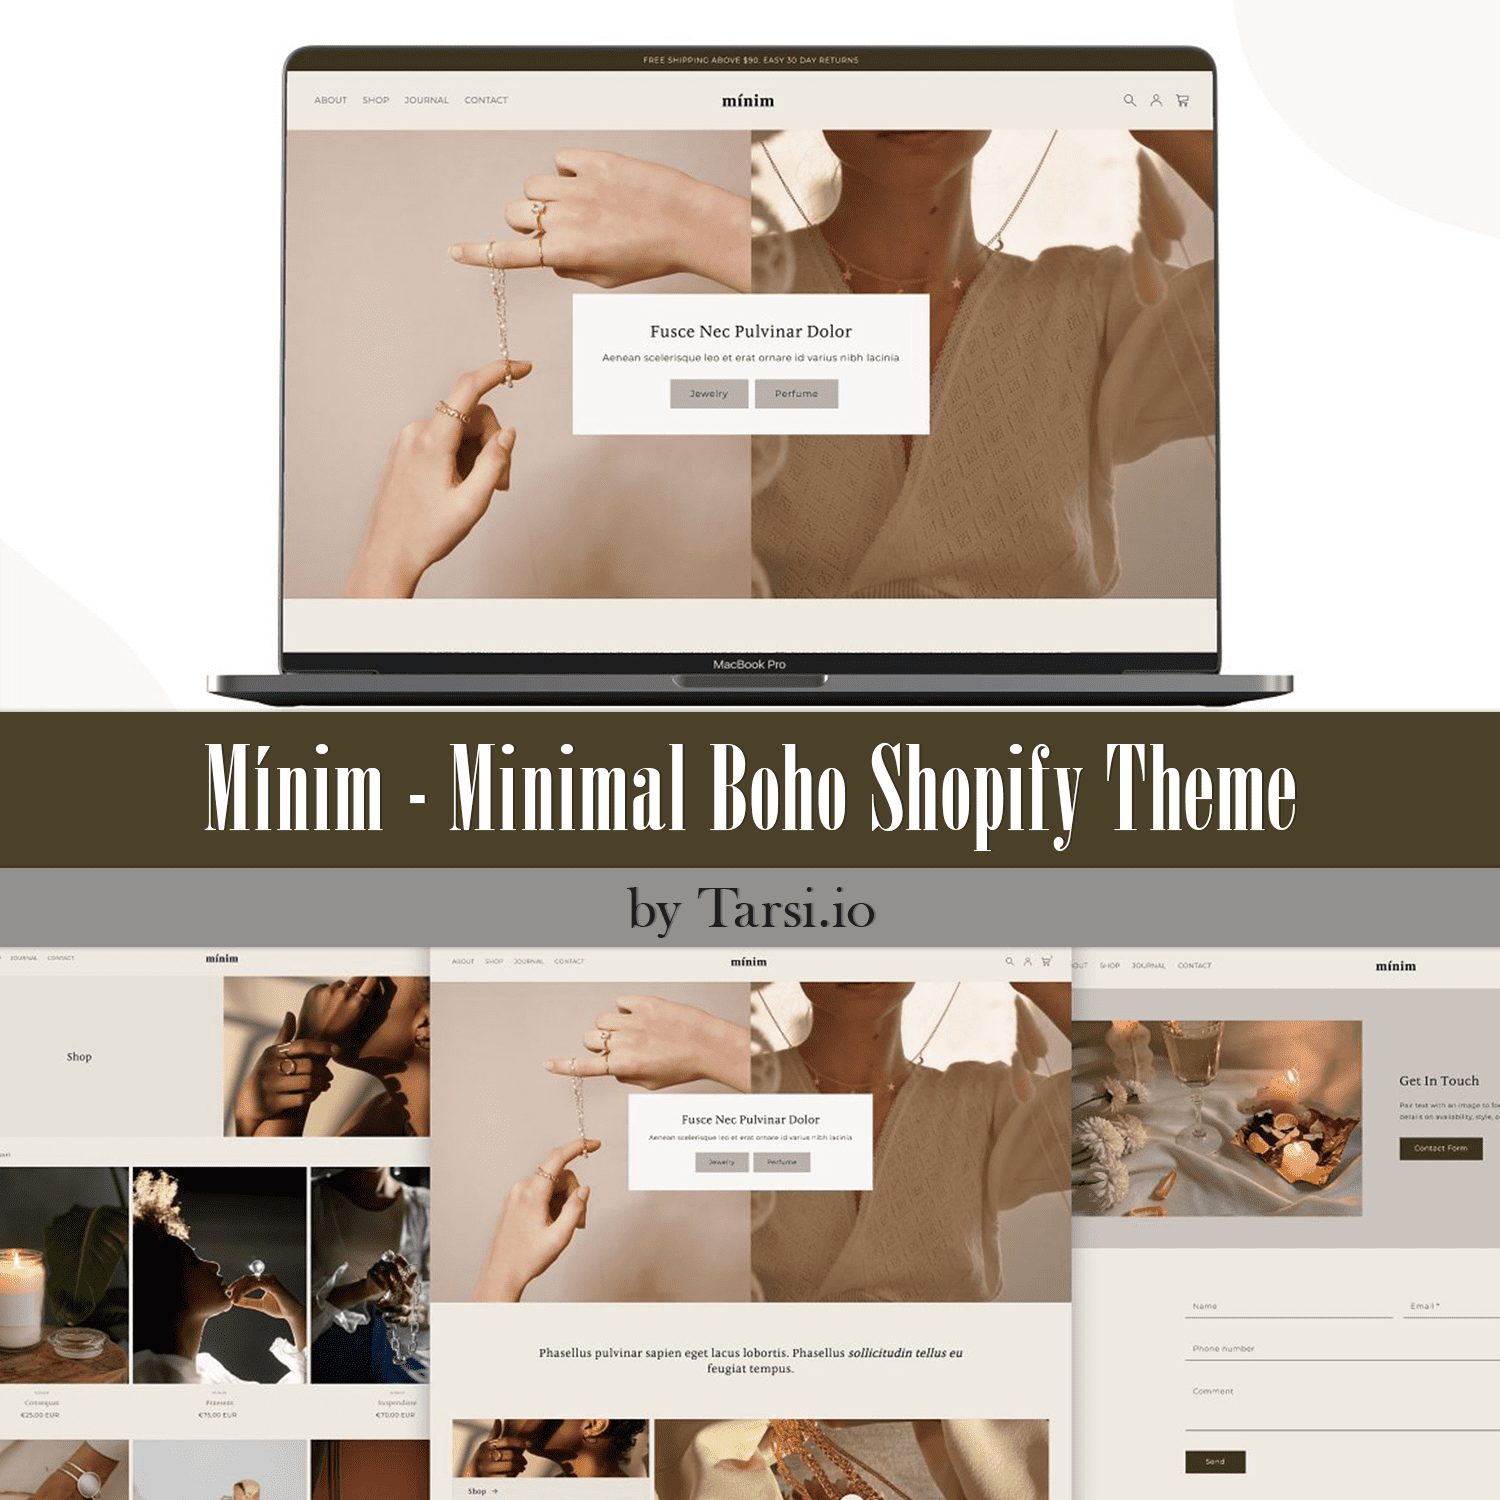 Set of adorable shopify theme images.